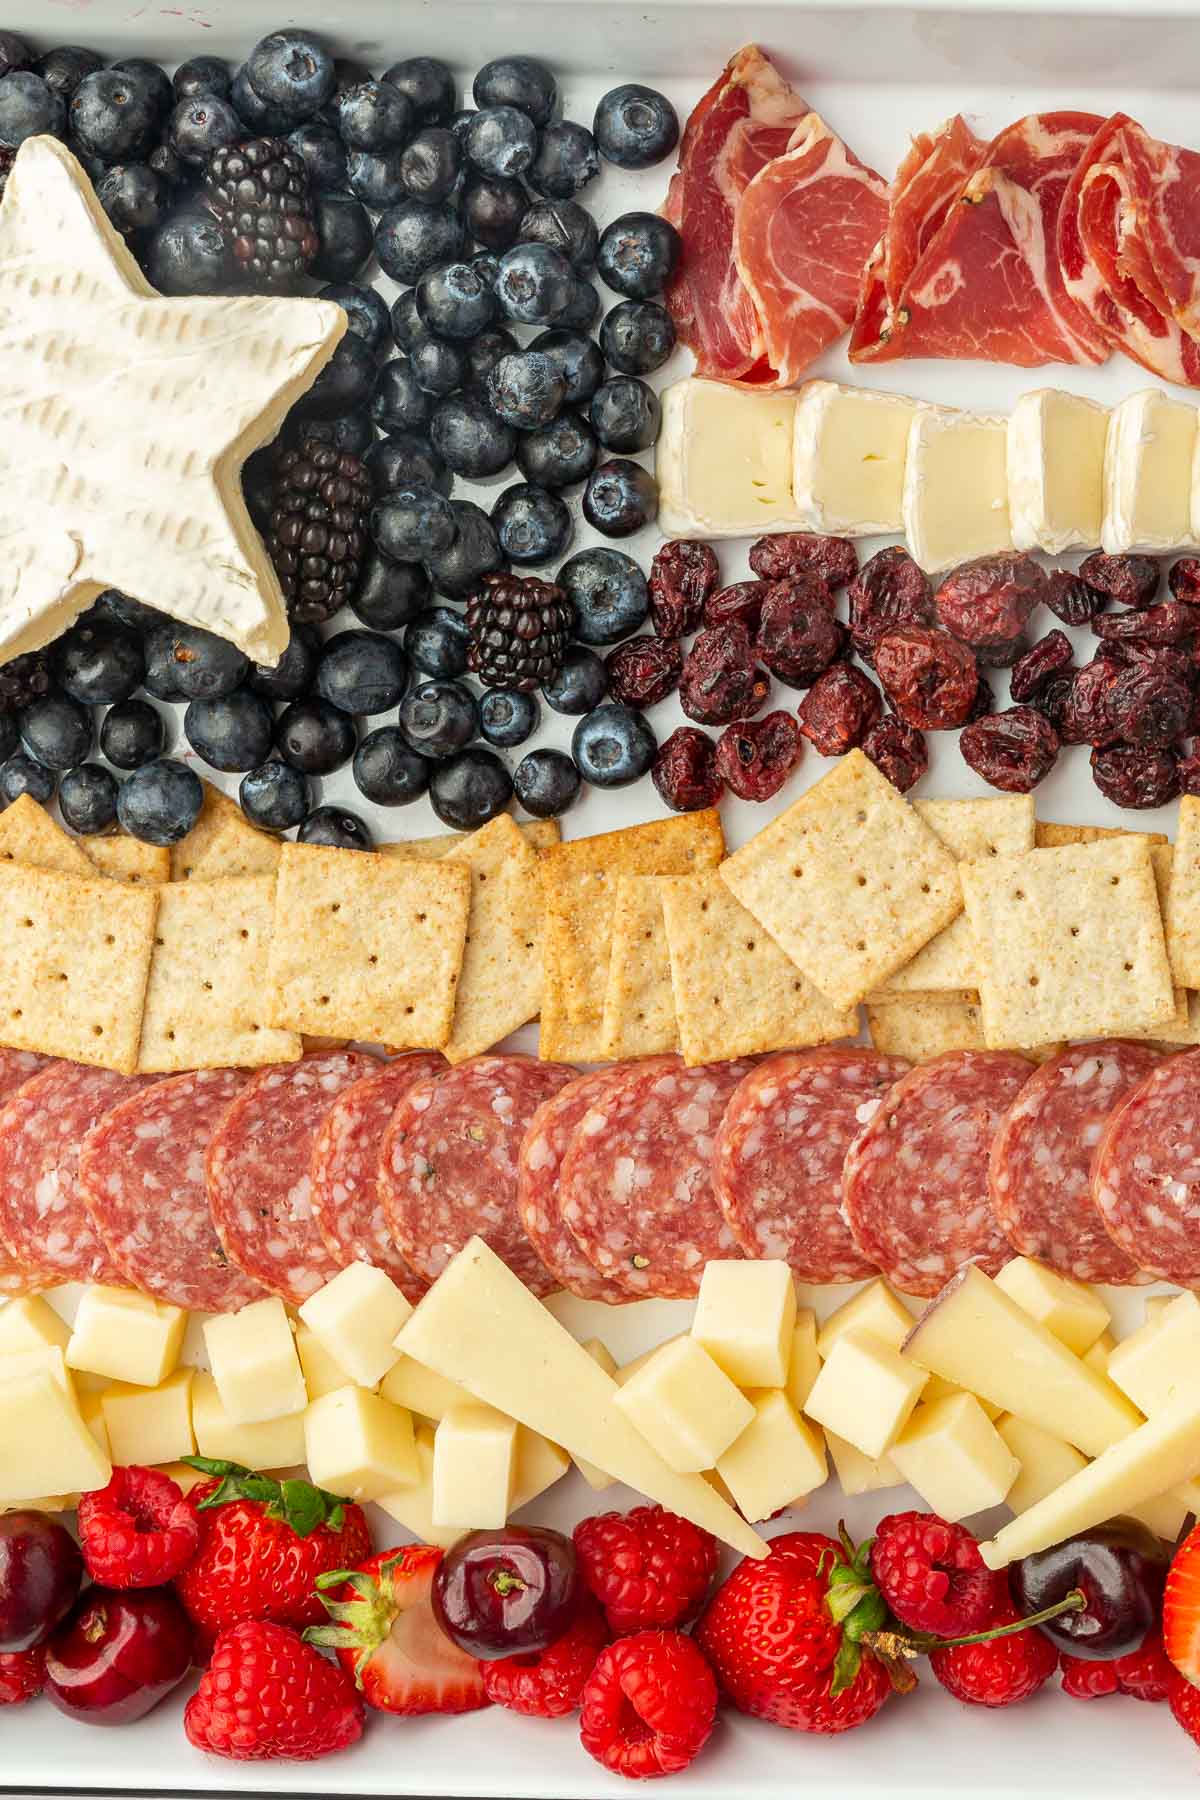 A close up of an American flag charcuterie board including blueberries, blackberries, a brie star, capicola, dried cranberries, salami, crackers, cheddar cheese, cherries, raspberries and strawberries.